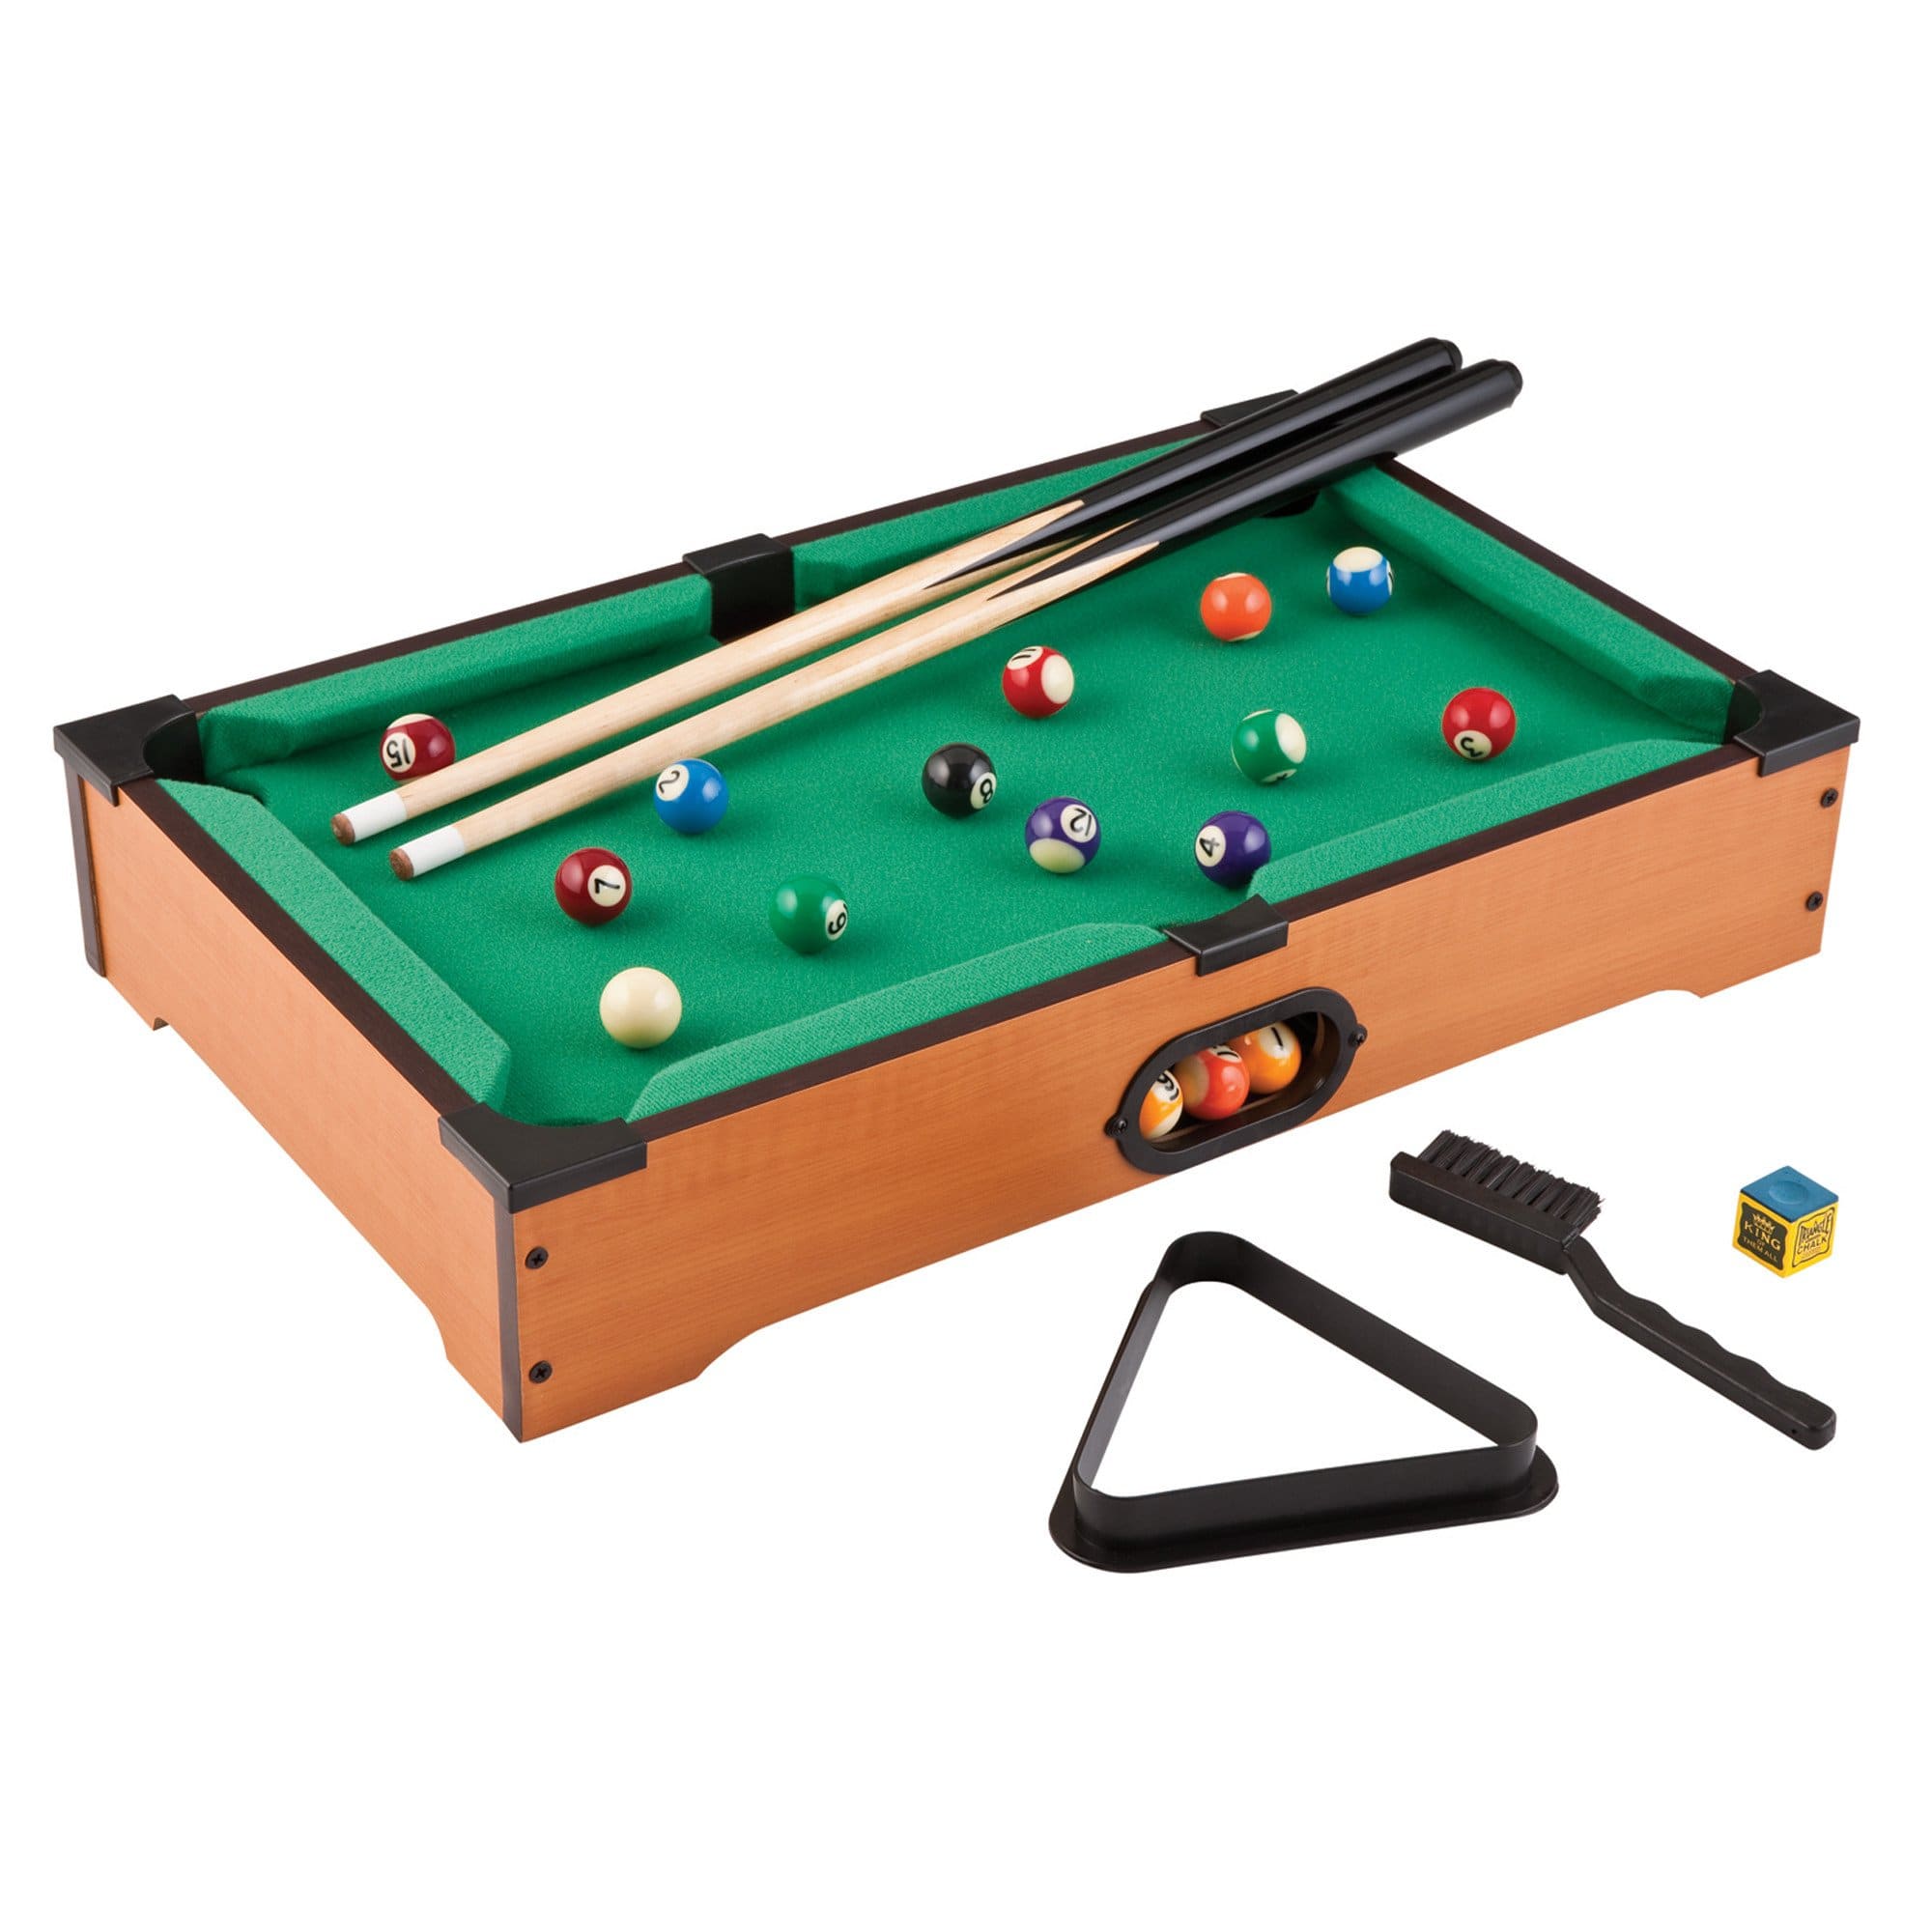 Mainstreet Classics Board Games Green / As shown Mainstreet Classics Sinister Table Top Billiards